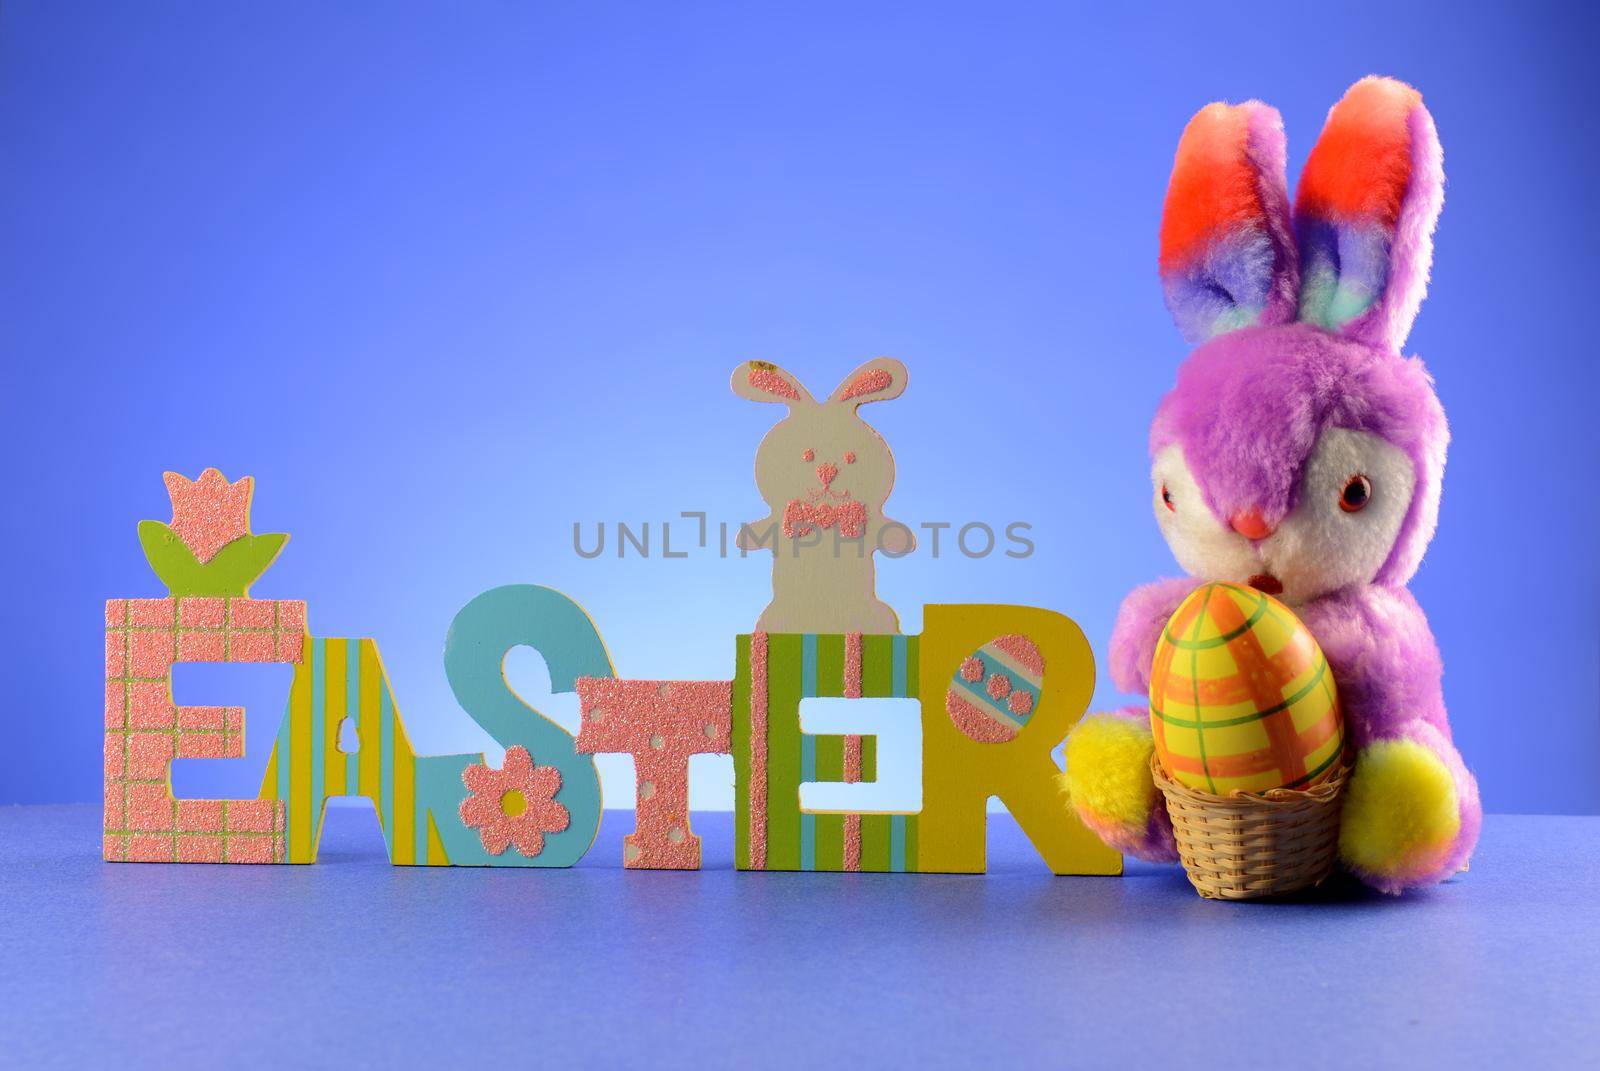 A festive holiday sign for Easter with a plush bunny over a blue background.